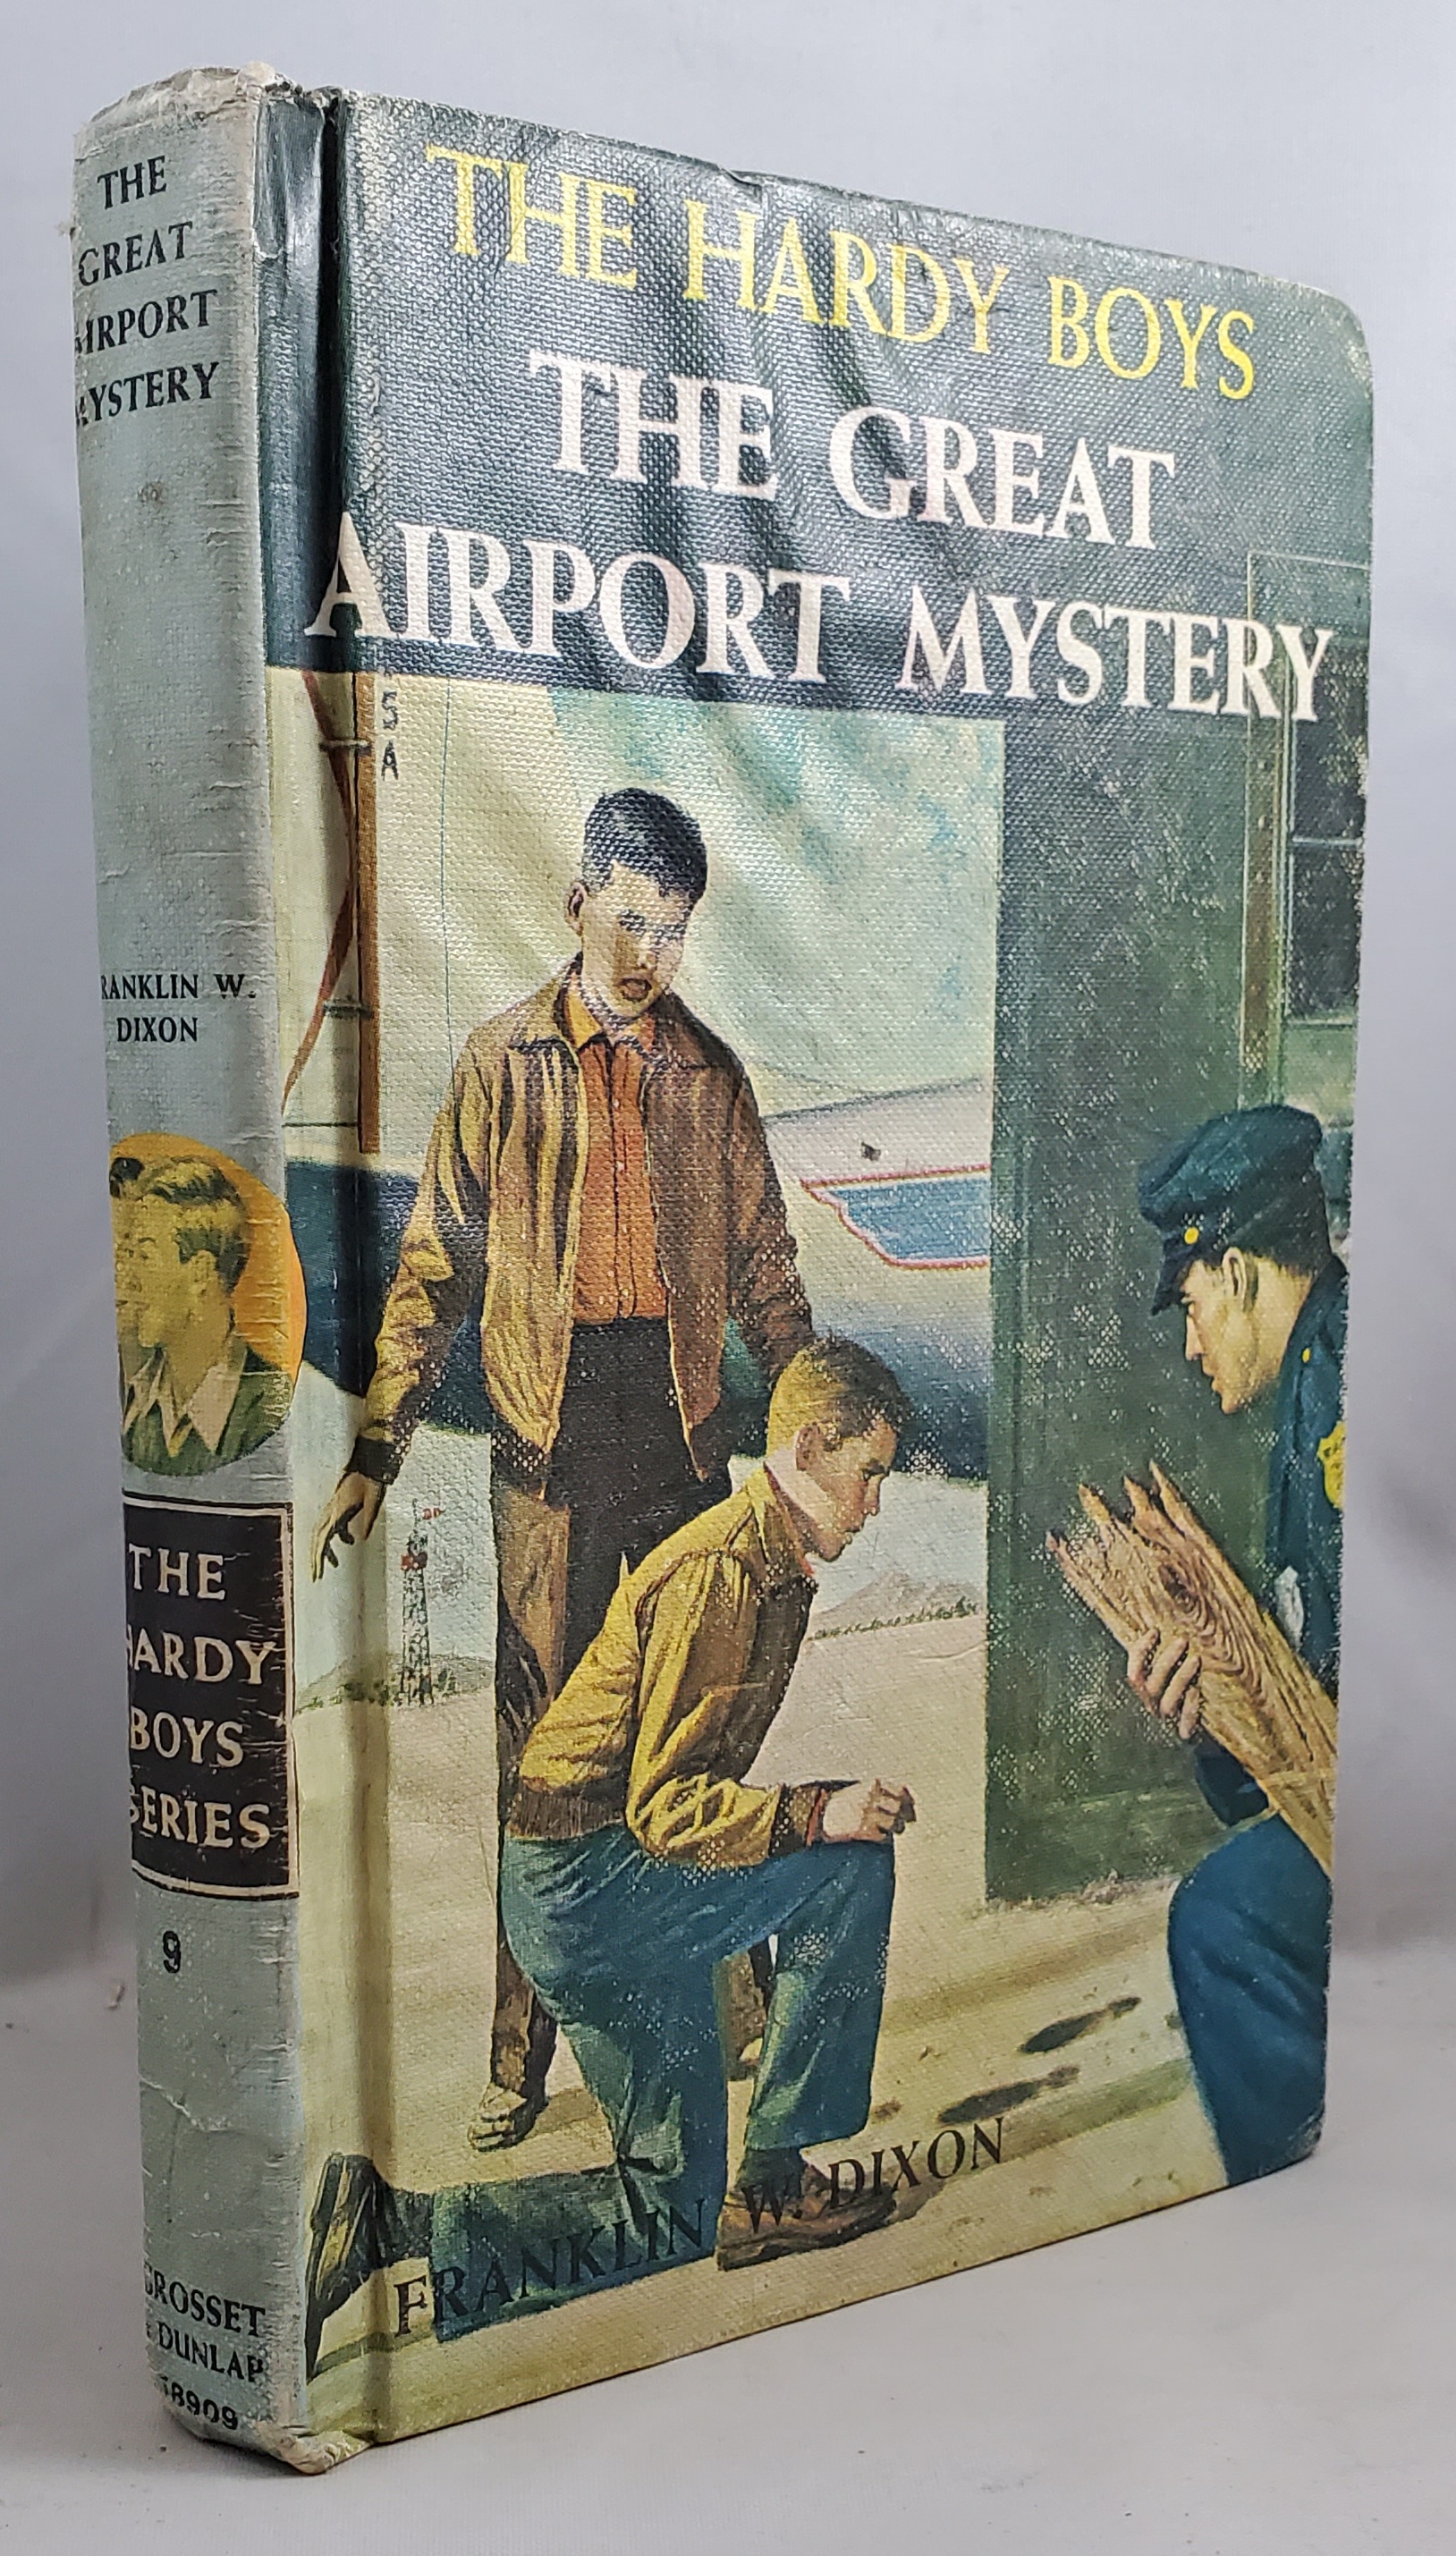 Hardy Boys and the great airport mystery